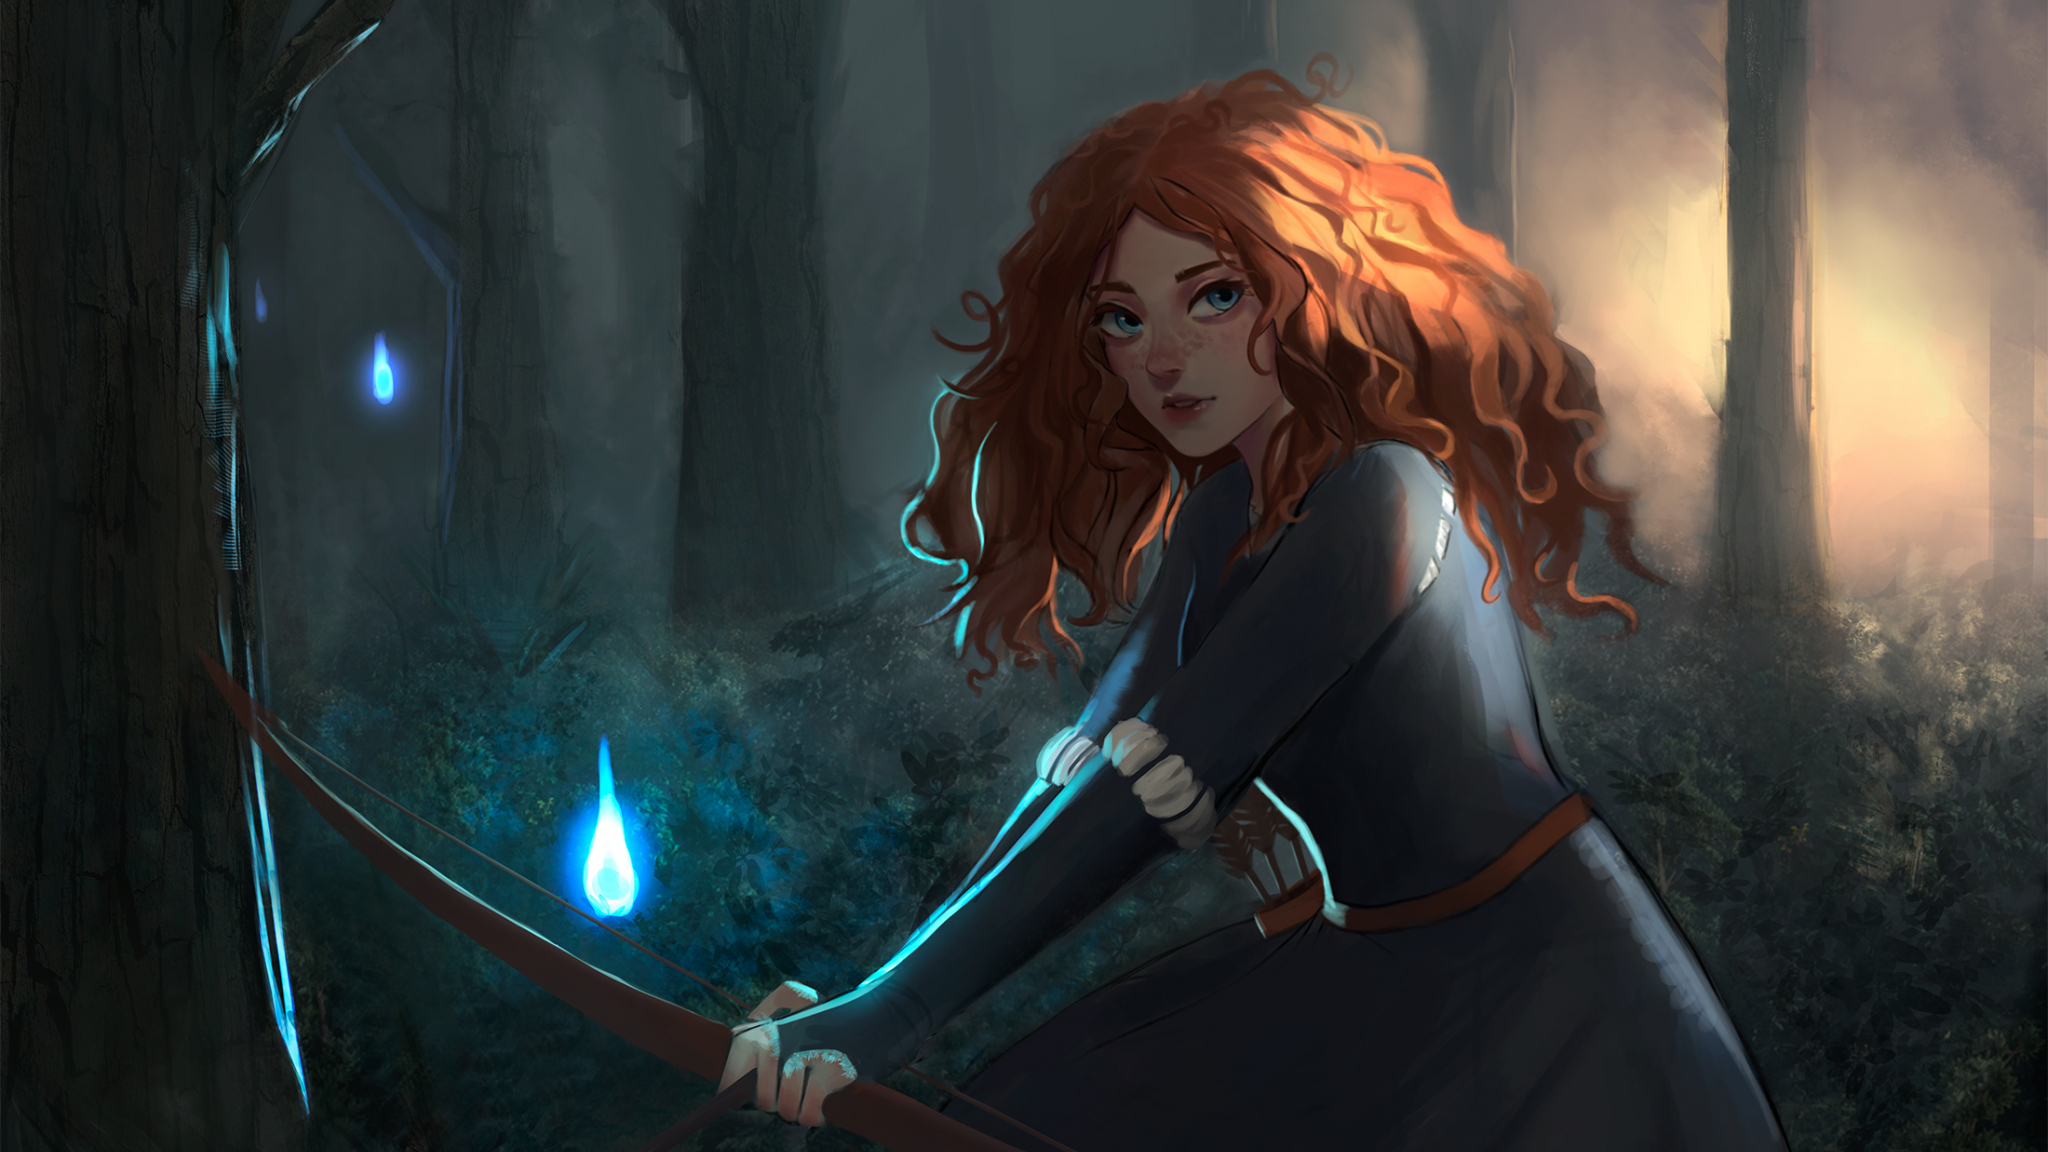 Download 2048x1152 Wallpaper Merida, Red Head Princess, Brave, Movie, Art,  Dual Wide, Widescreen, 2048x1152 Hd Image, Background, 23920